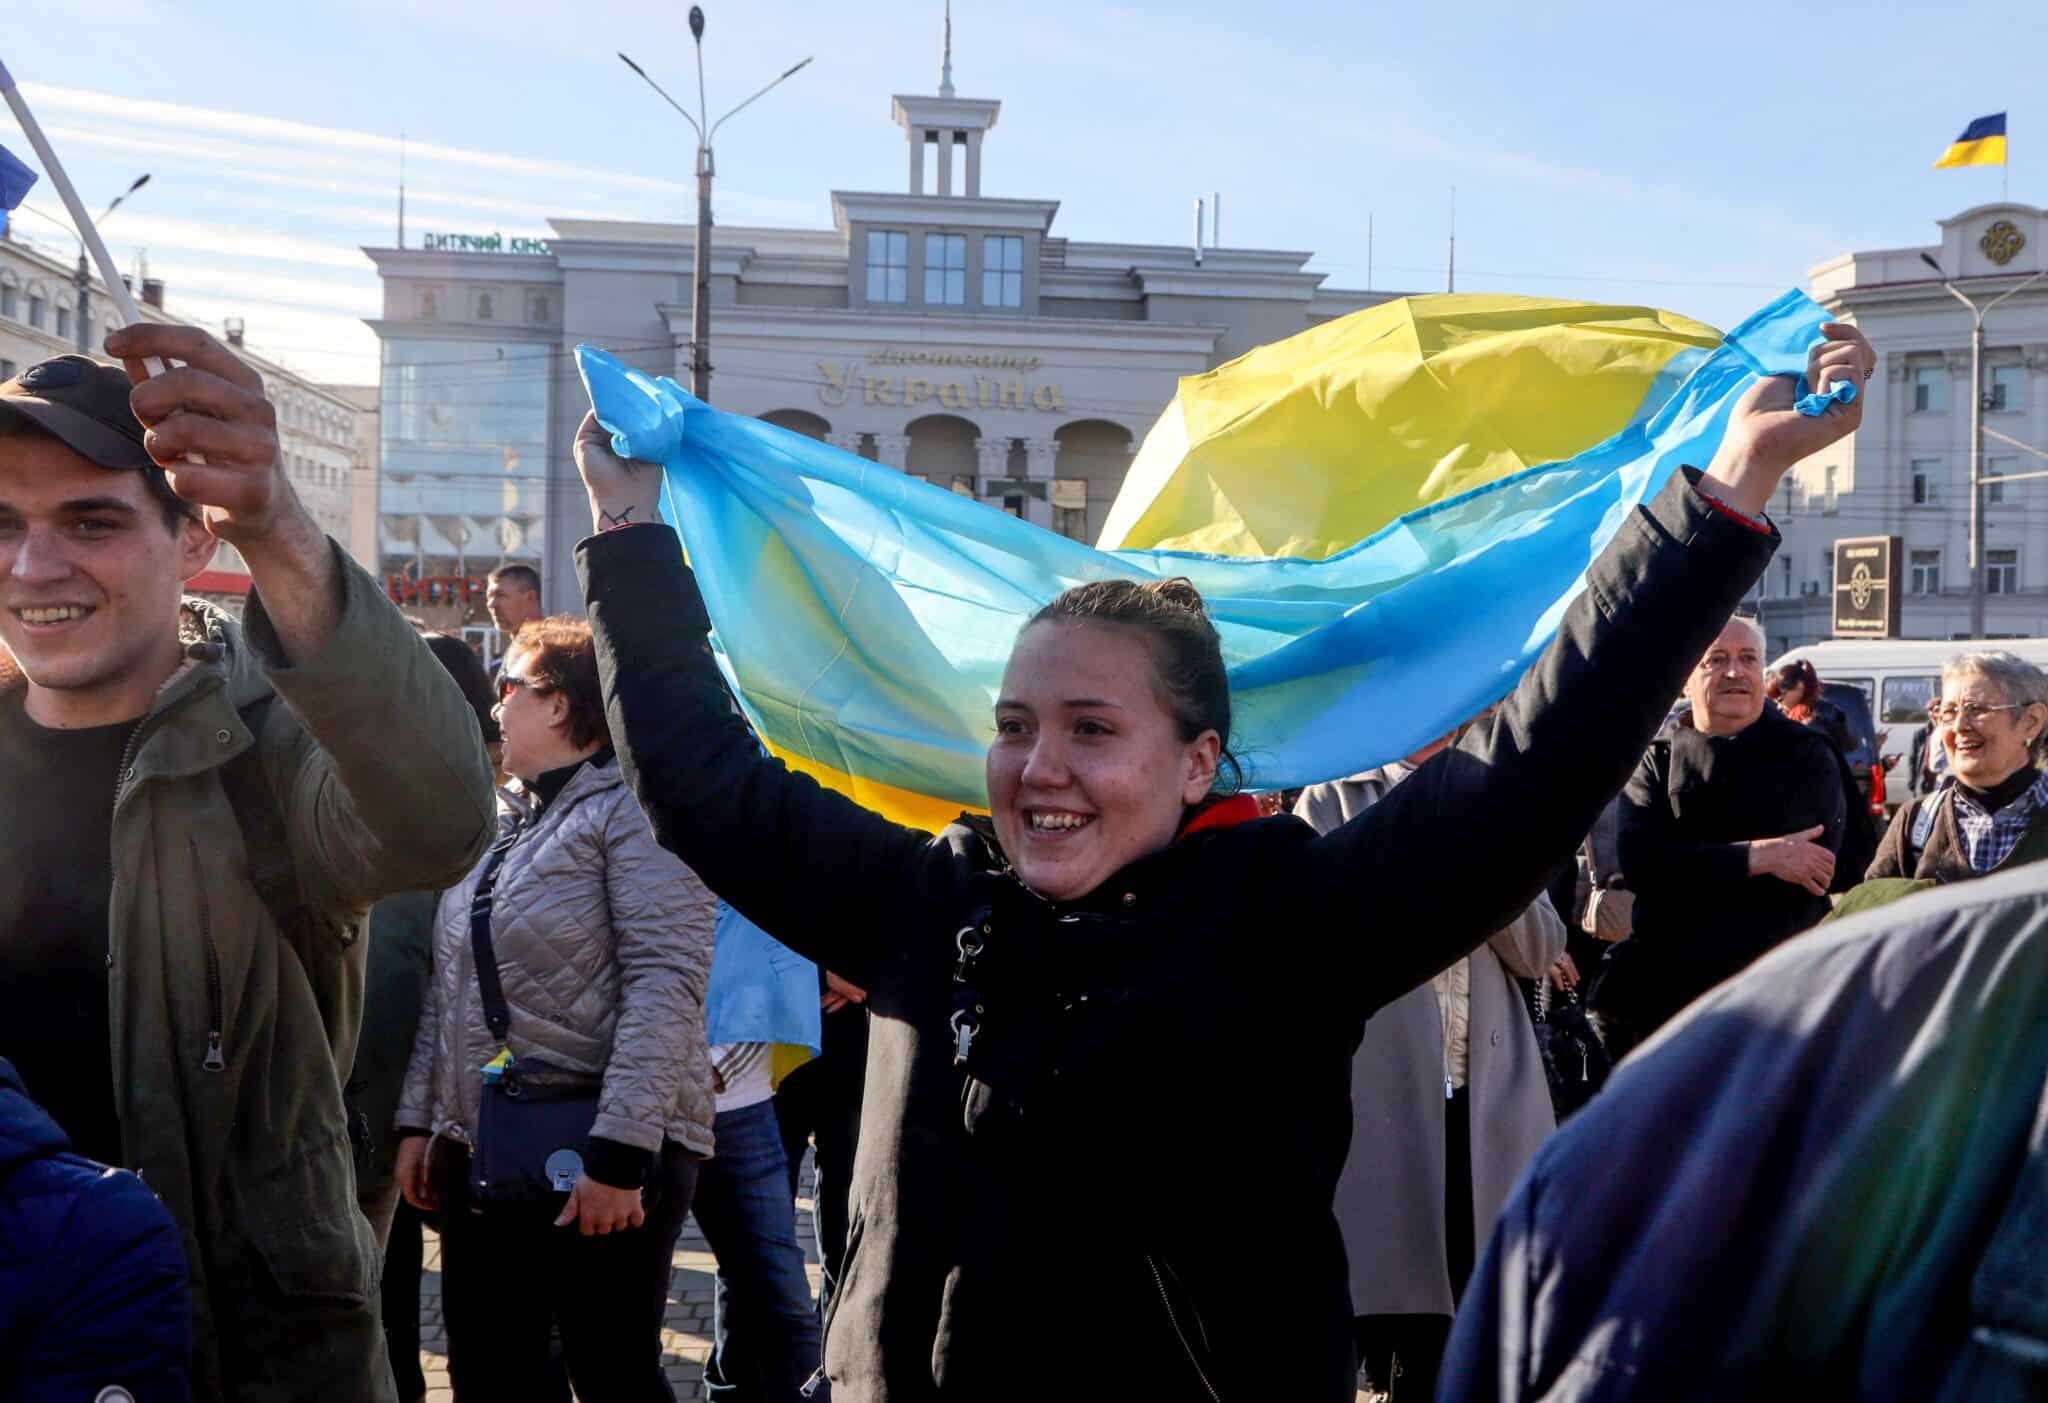 A woman waves a Ukrainian flag in the centre of the recently recaptured city of Kherson on November 14, 2022. - The takeover by Ukrainian troops of the Kherson region is the latest in a string of setbacks for Russia, which invaded Ukraine on February 24 hoping for a lightning takeover and to topple the government in days. (Photo by Oleksandr GIMANOV / AFP) (Photo by OLEKSANDR GIMANOV/AFP via Getty Images)